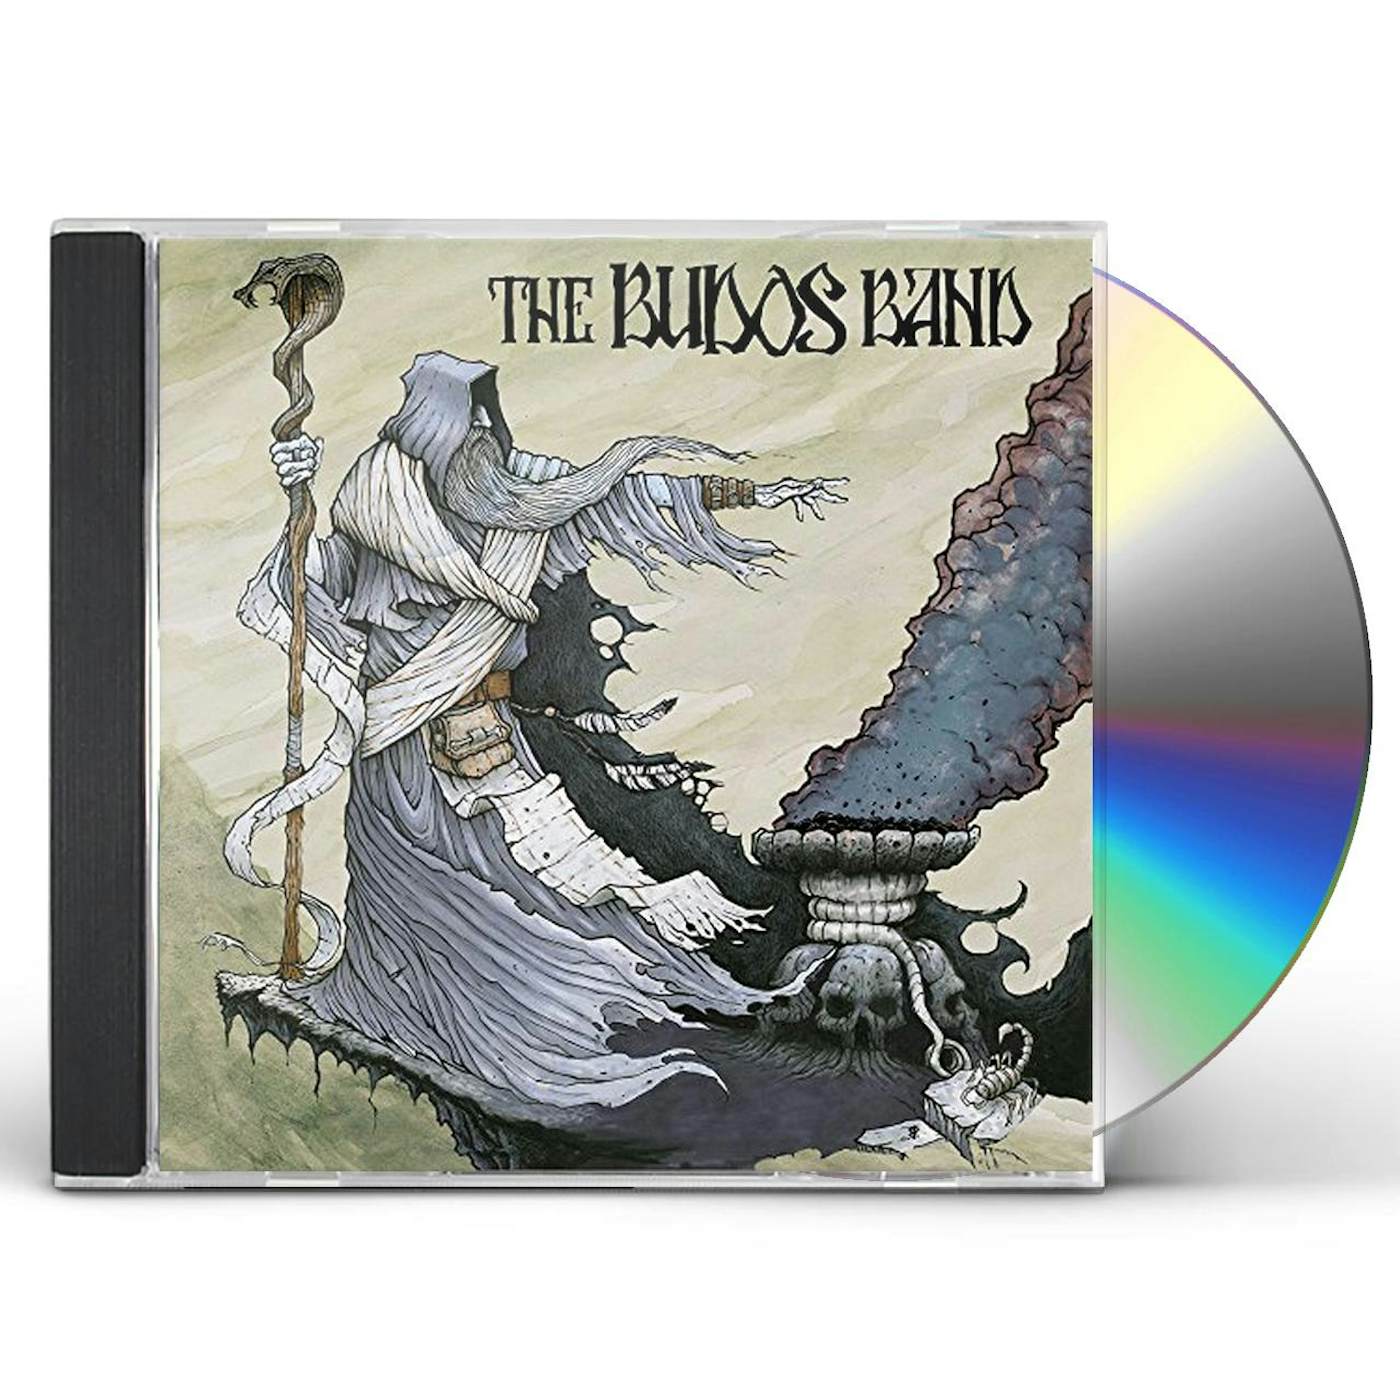 The Budos Band BURNT OFFERING CD